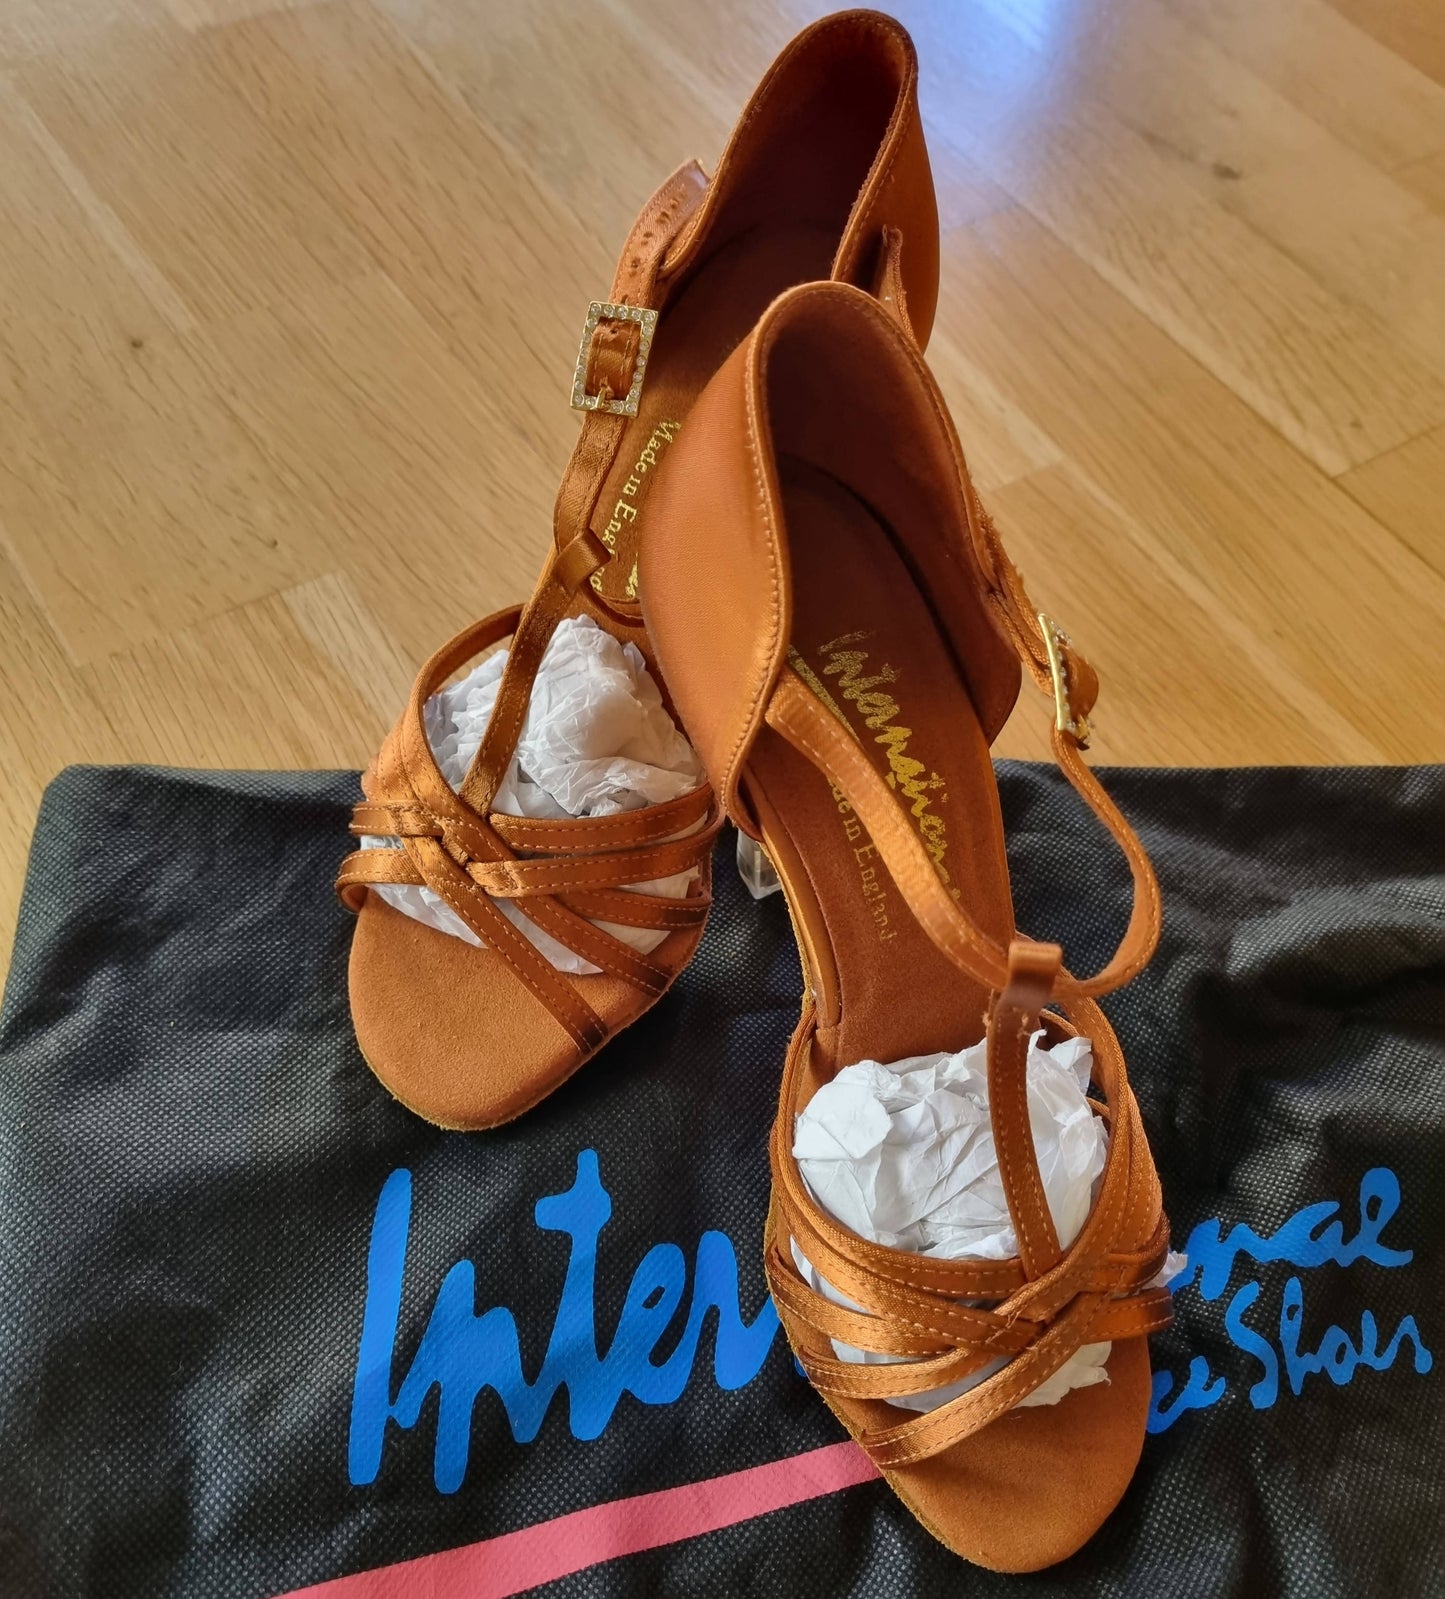 international dance shoes, tan satin latin shoes, shoes for dancing in tan color